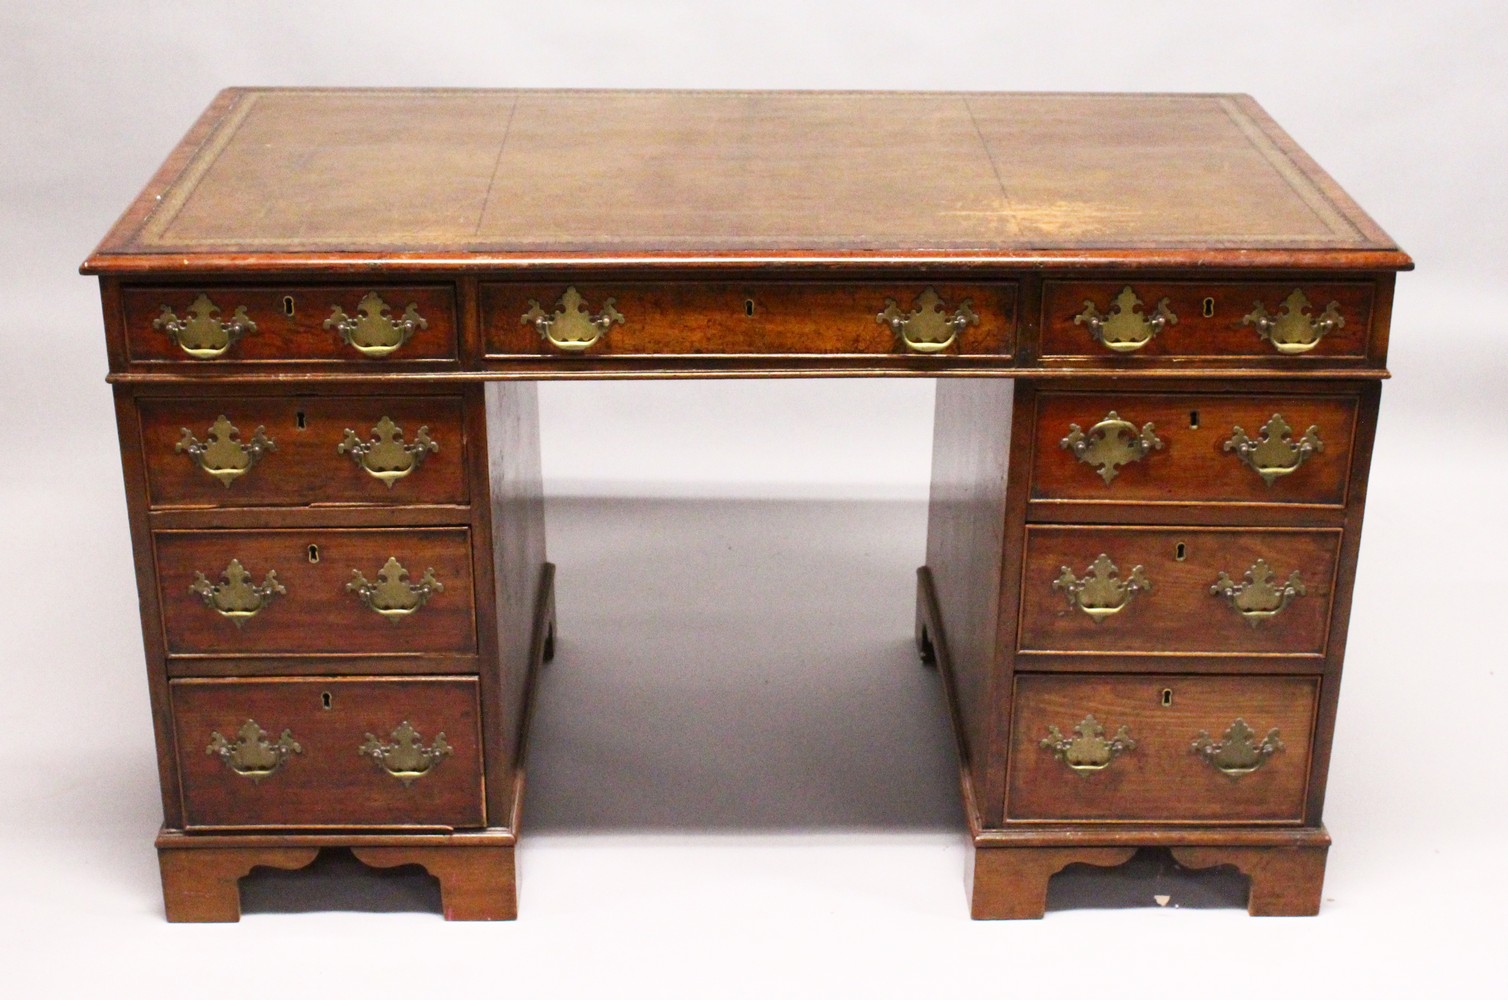 A GEORGE III MAHOGANY PEDESTAL DESK, with gilt tooled leather inset writing surface, three frieze